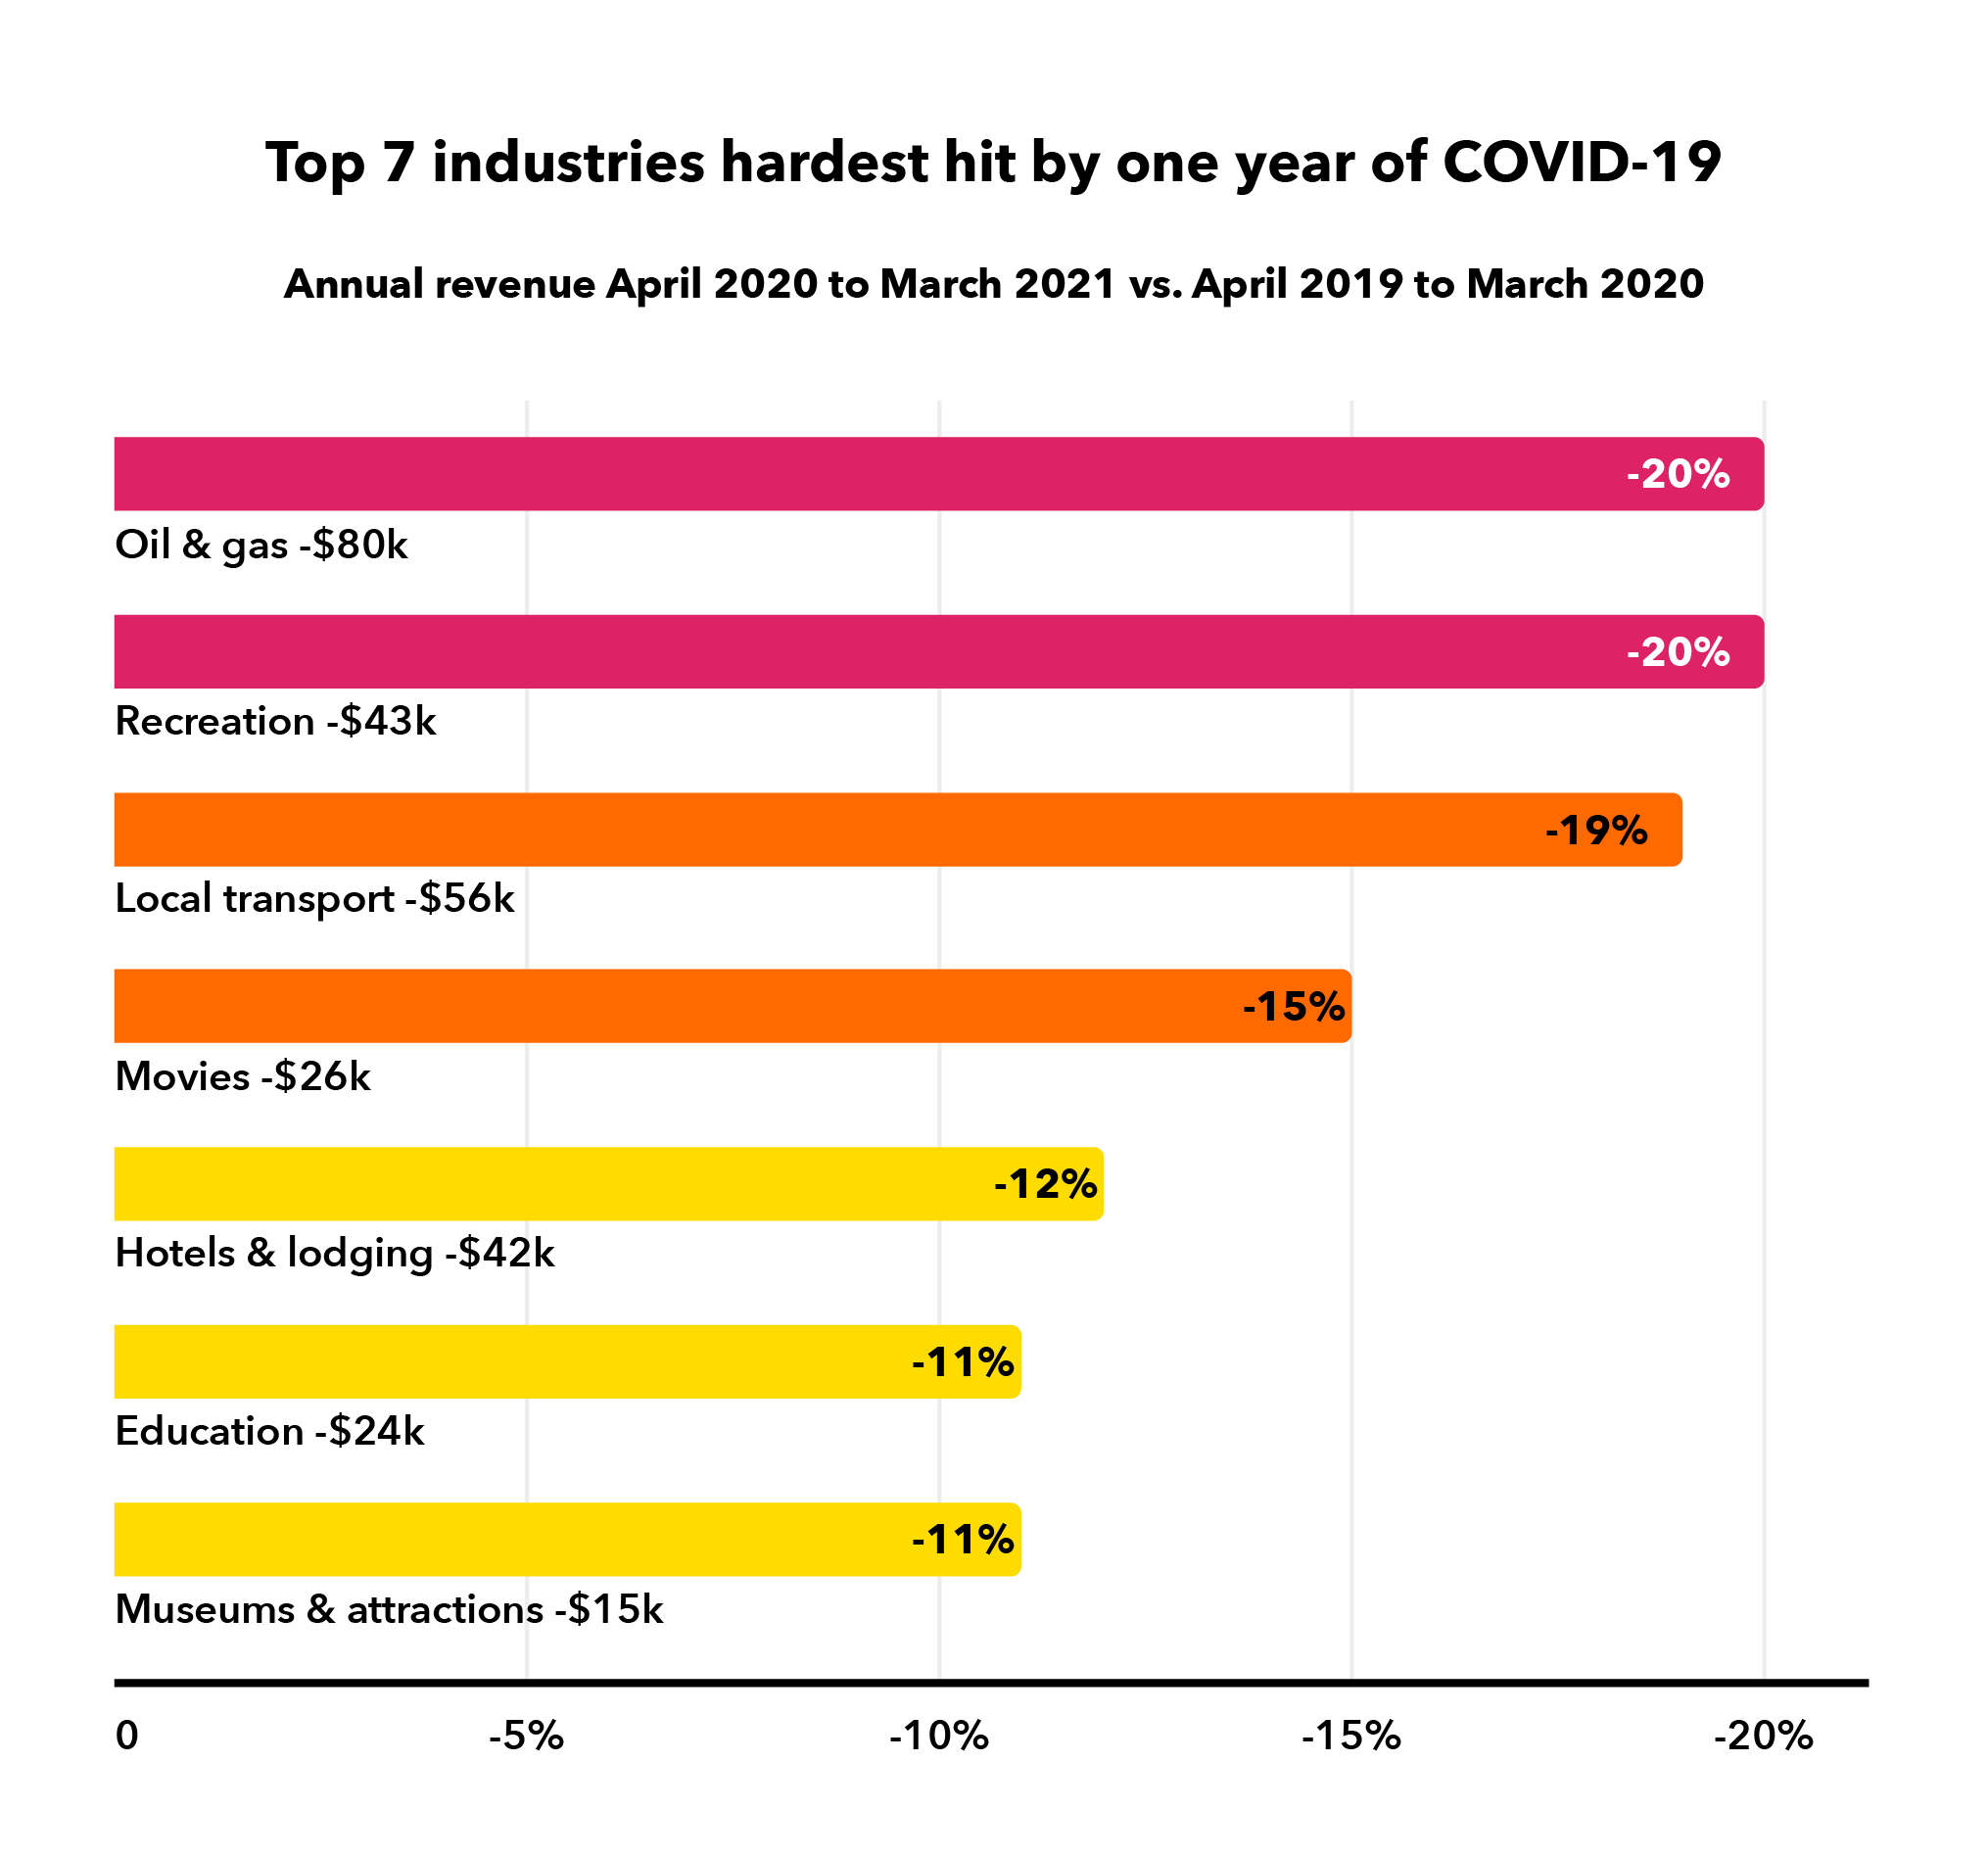 Top 7 industries hardest hit by COVID-19